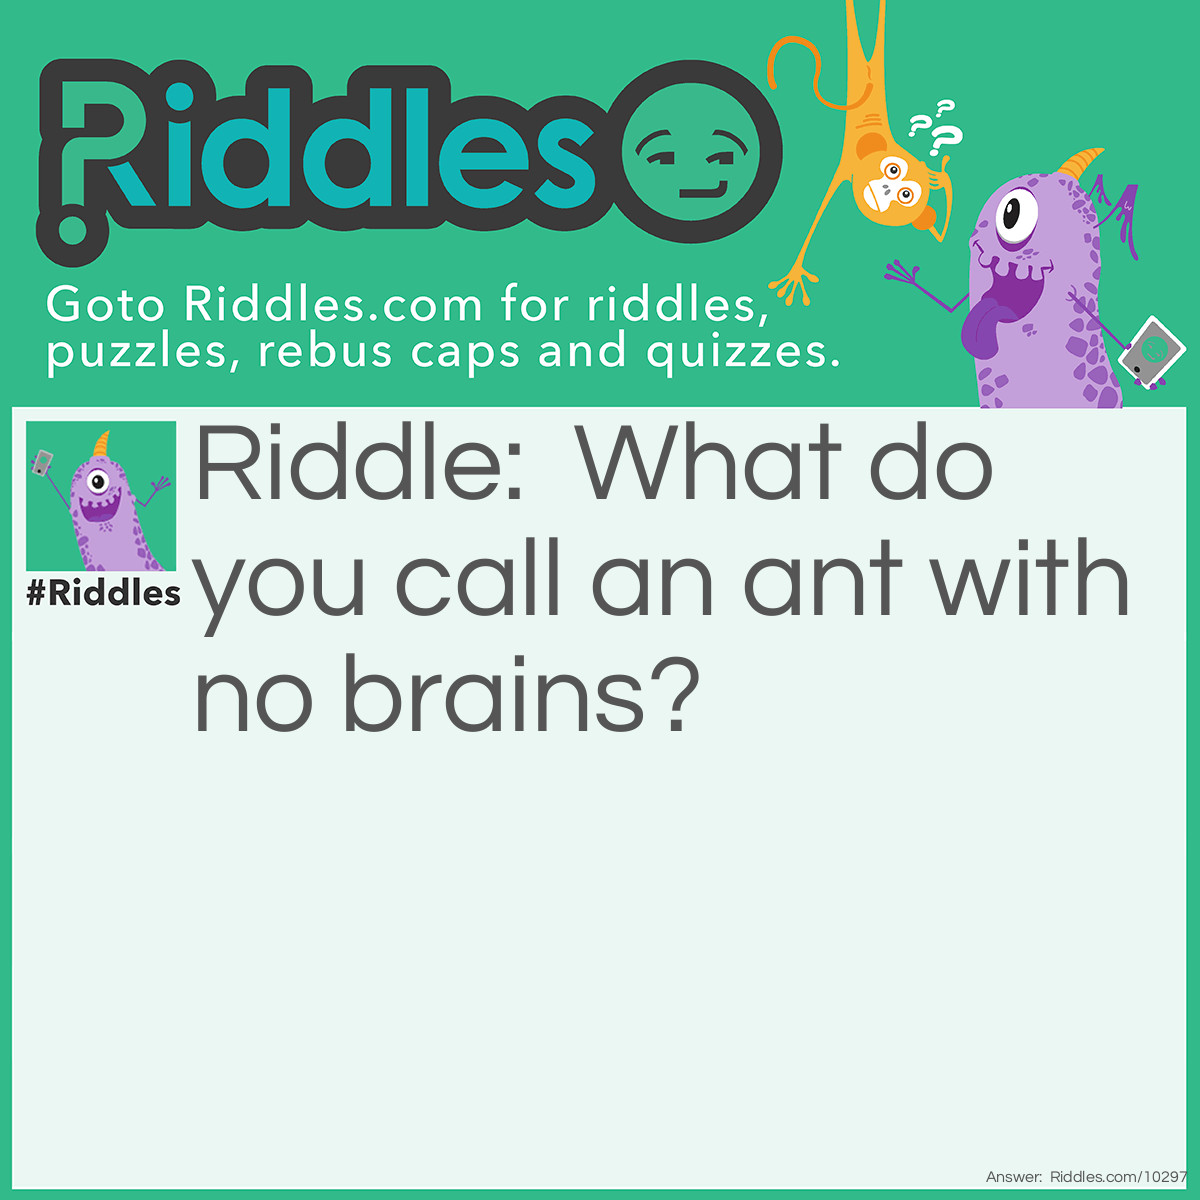 Riddle: What do you call an ant with no brains? Answer: An antibrain!